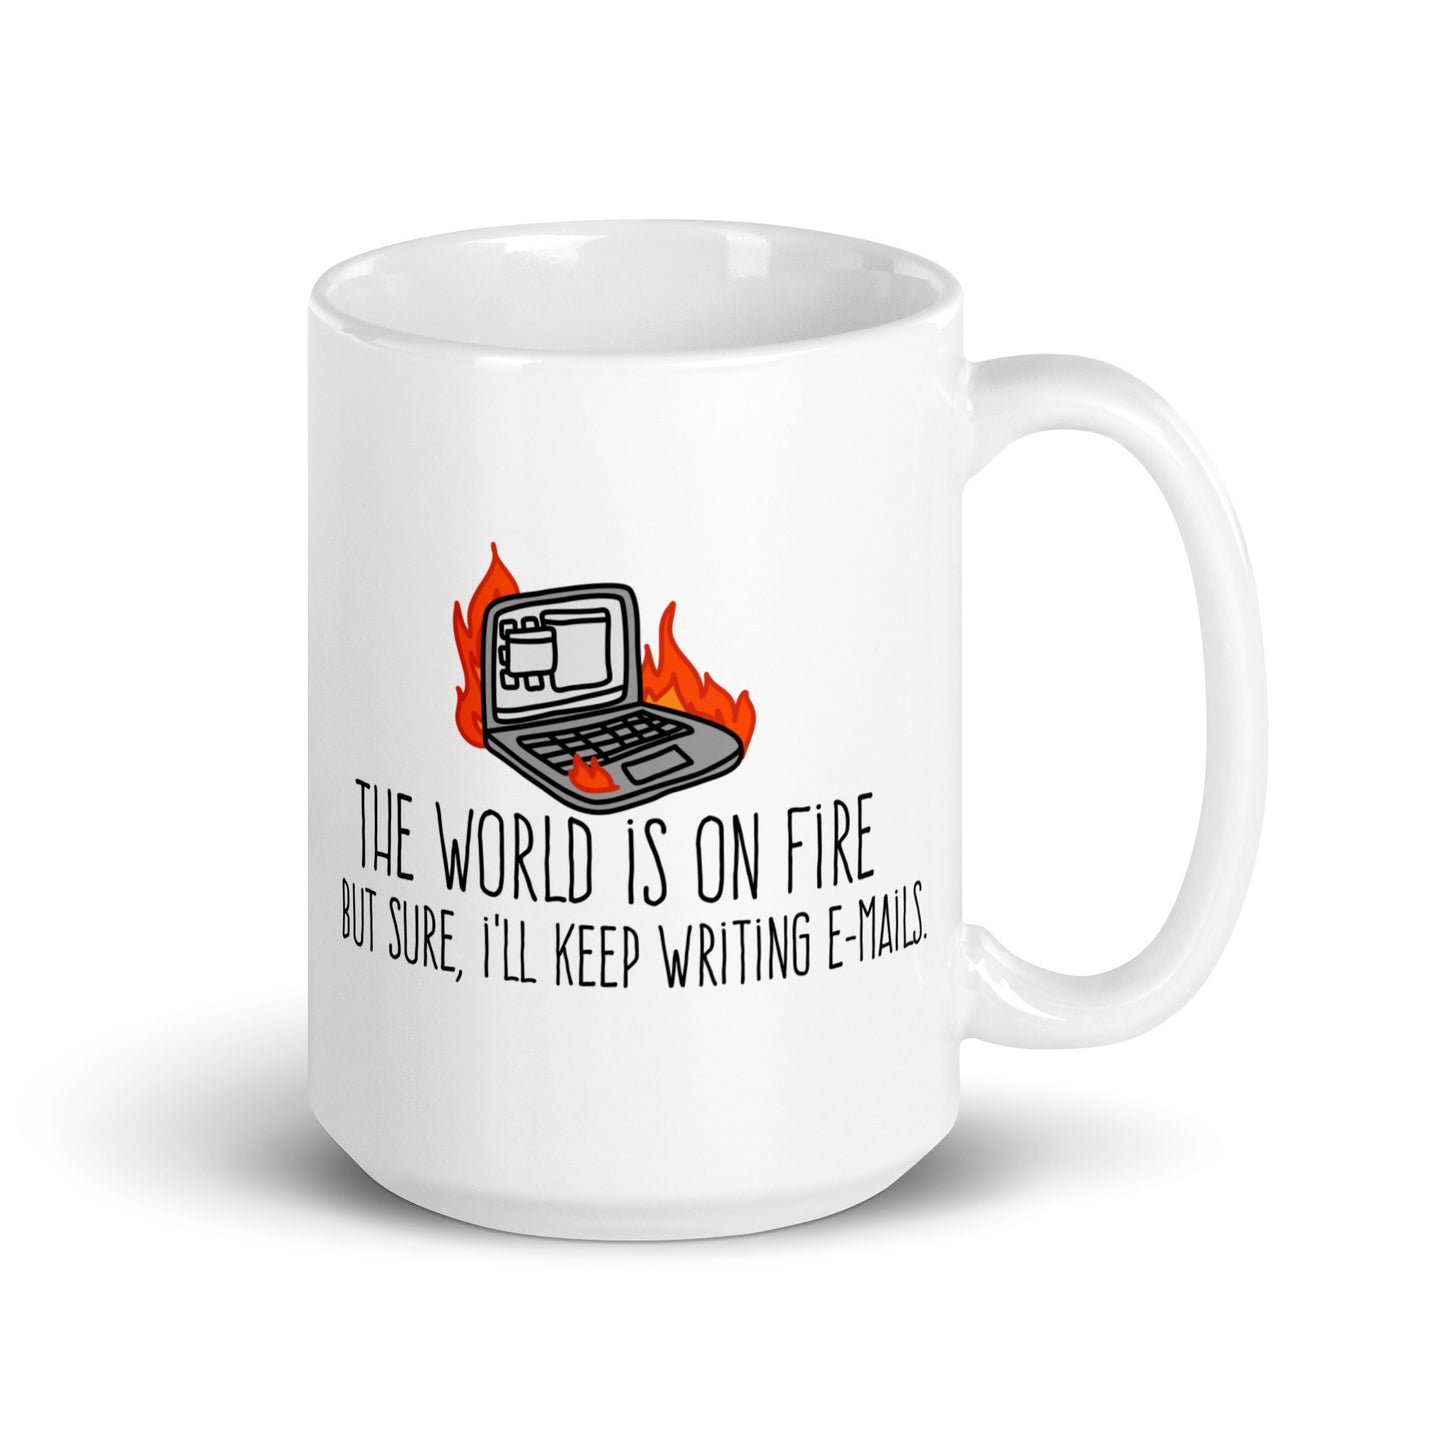 A white ceramic mug featuring a wobbly illustration of a laptop on fire. Text underneath the laptop reads "The world is on fire but sure, I'll keep writing e-mails"